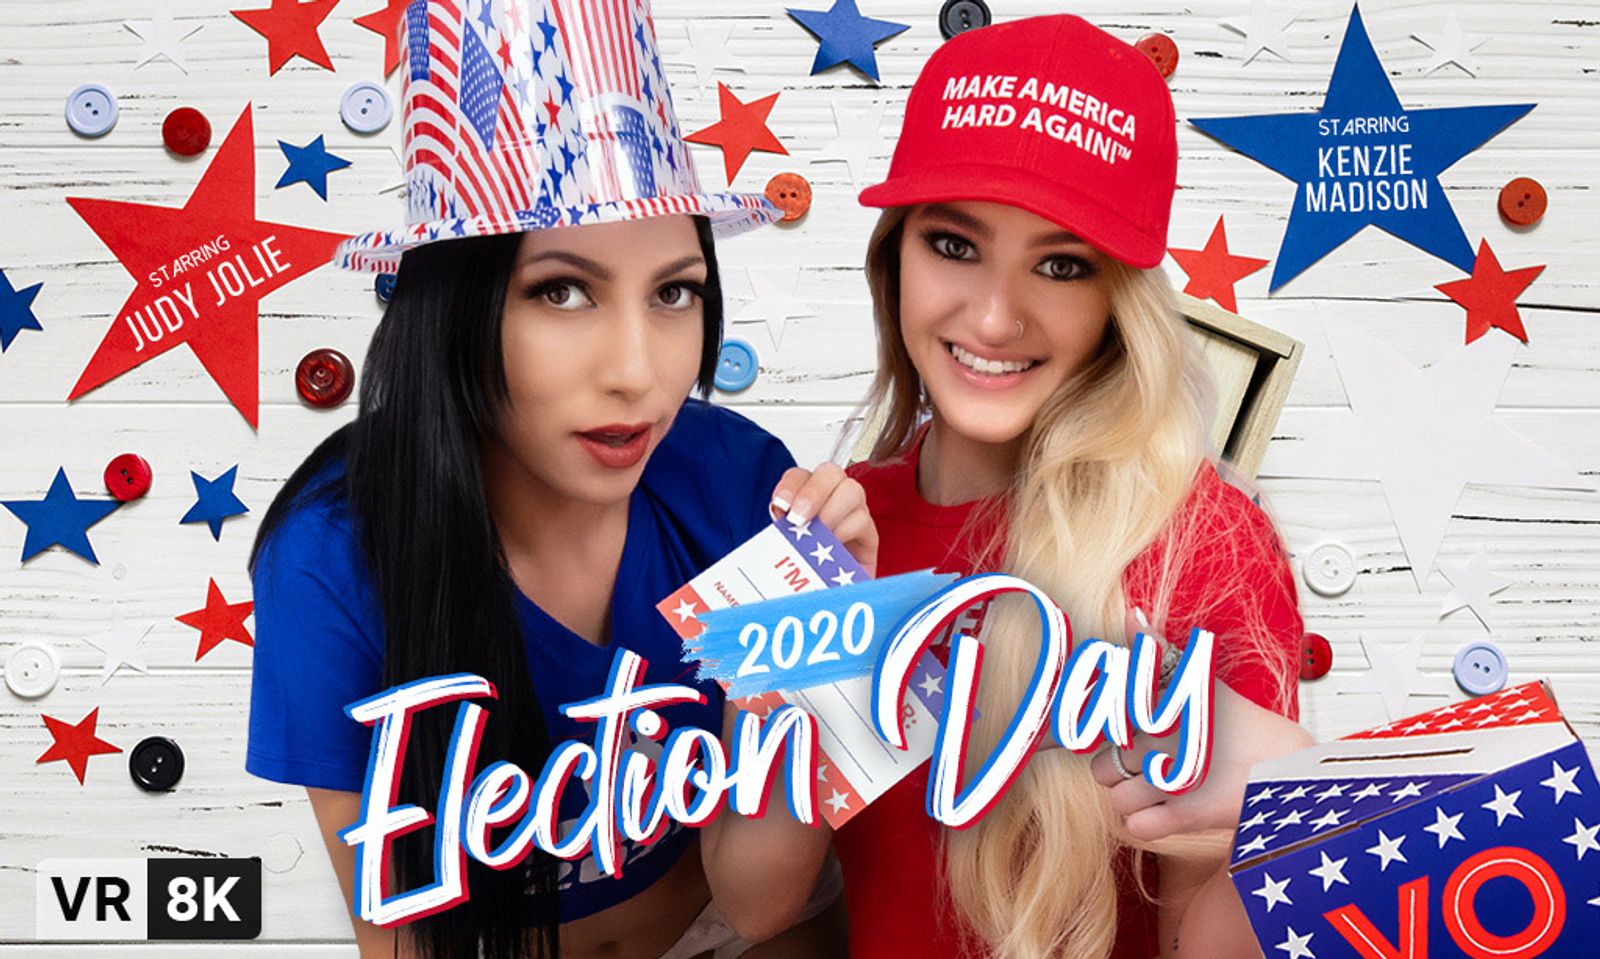 Vr Bangers Offers 2 New Scenes For Election Day And Beyond Avn